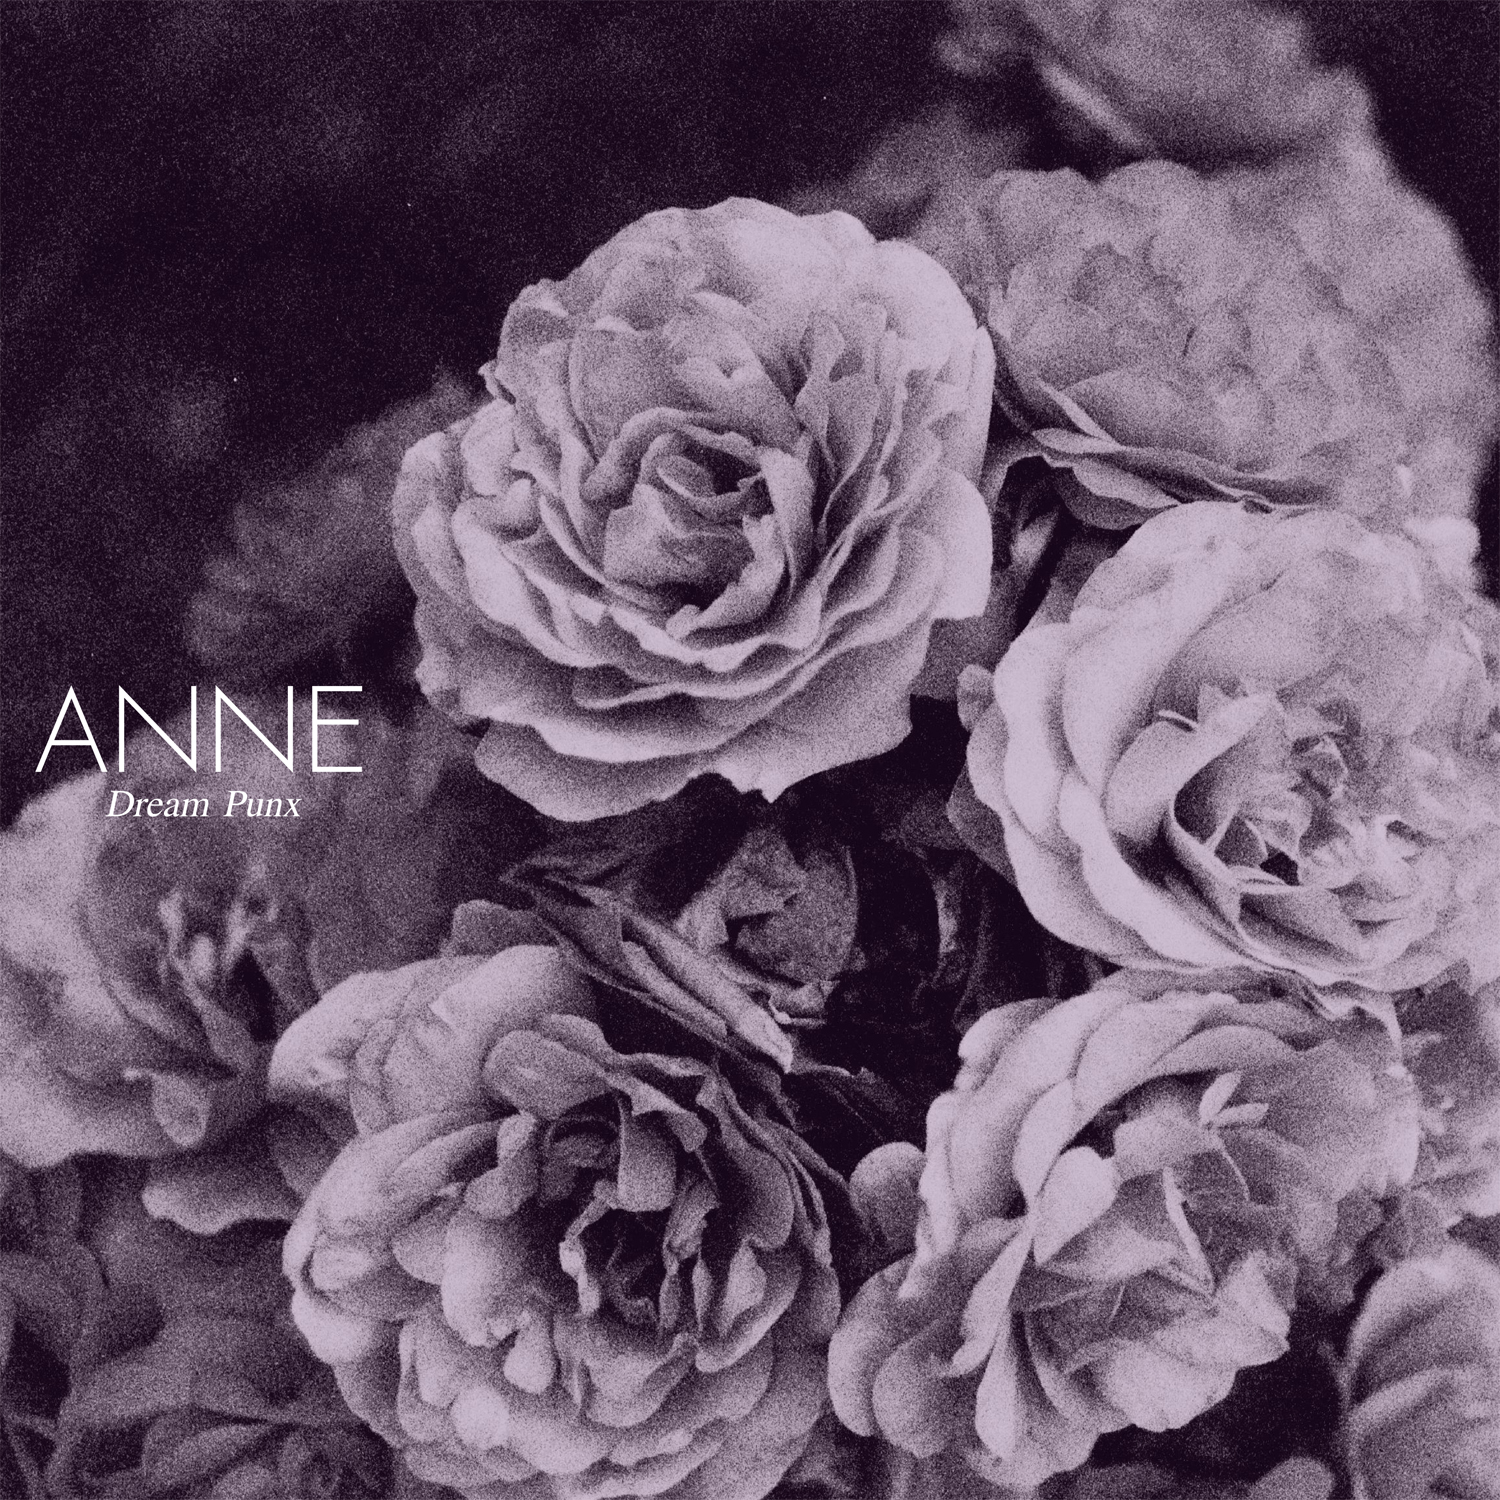 Run For Cover Records releasing new 7″ by Anne